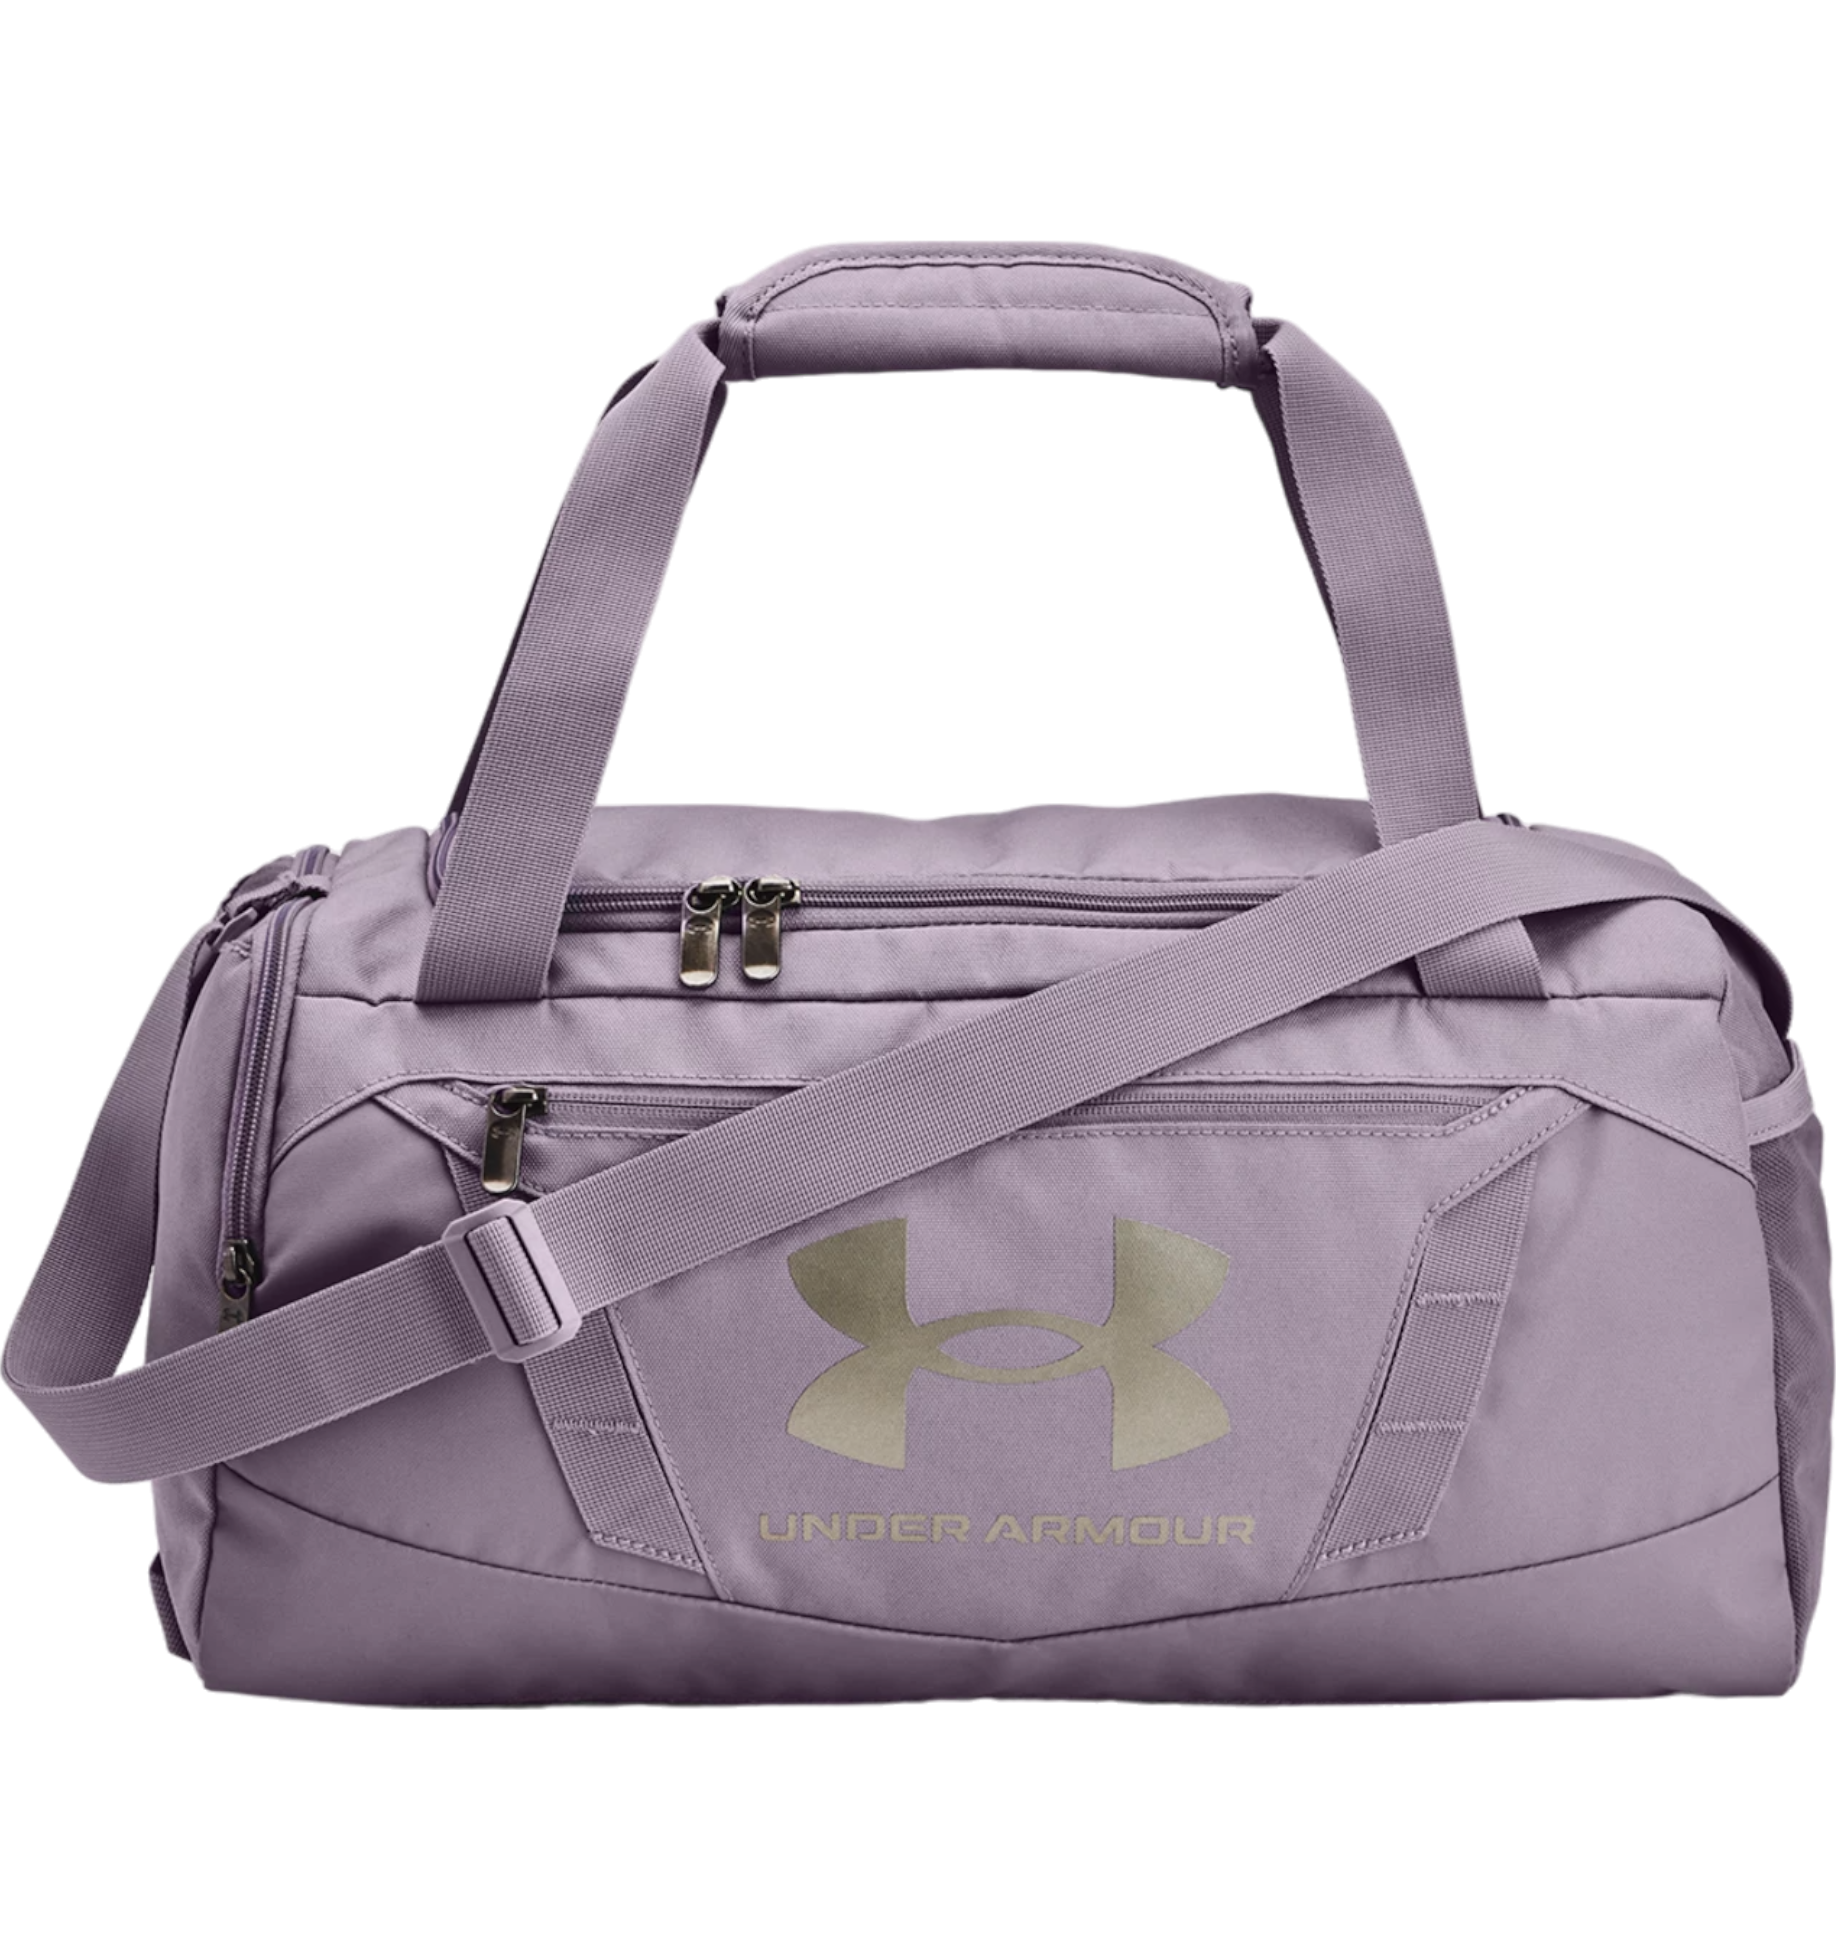 Bag Under Armour Undeniable 5.0 Duffle XS